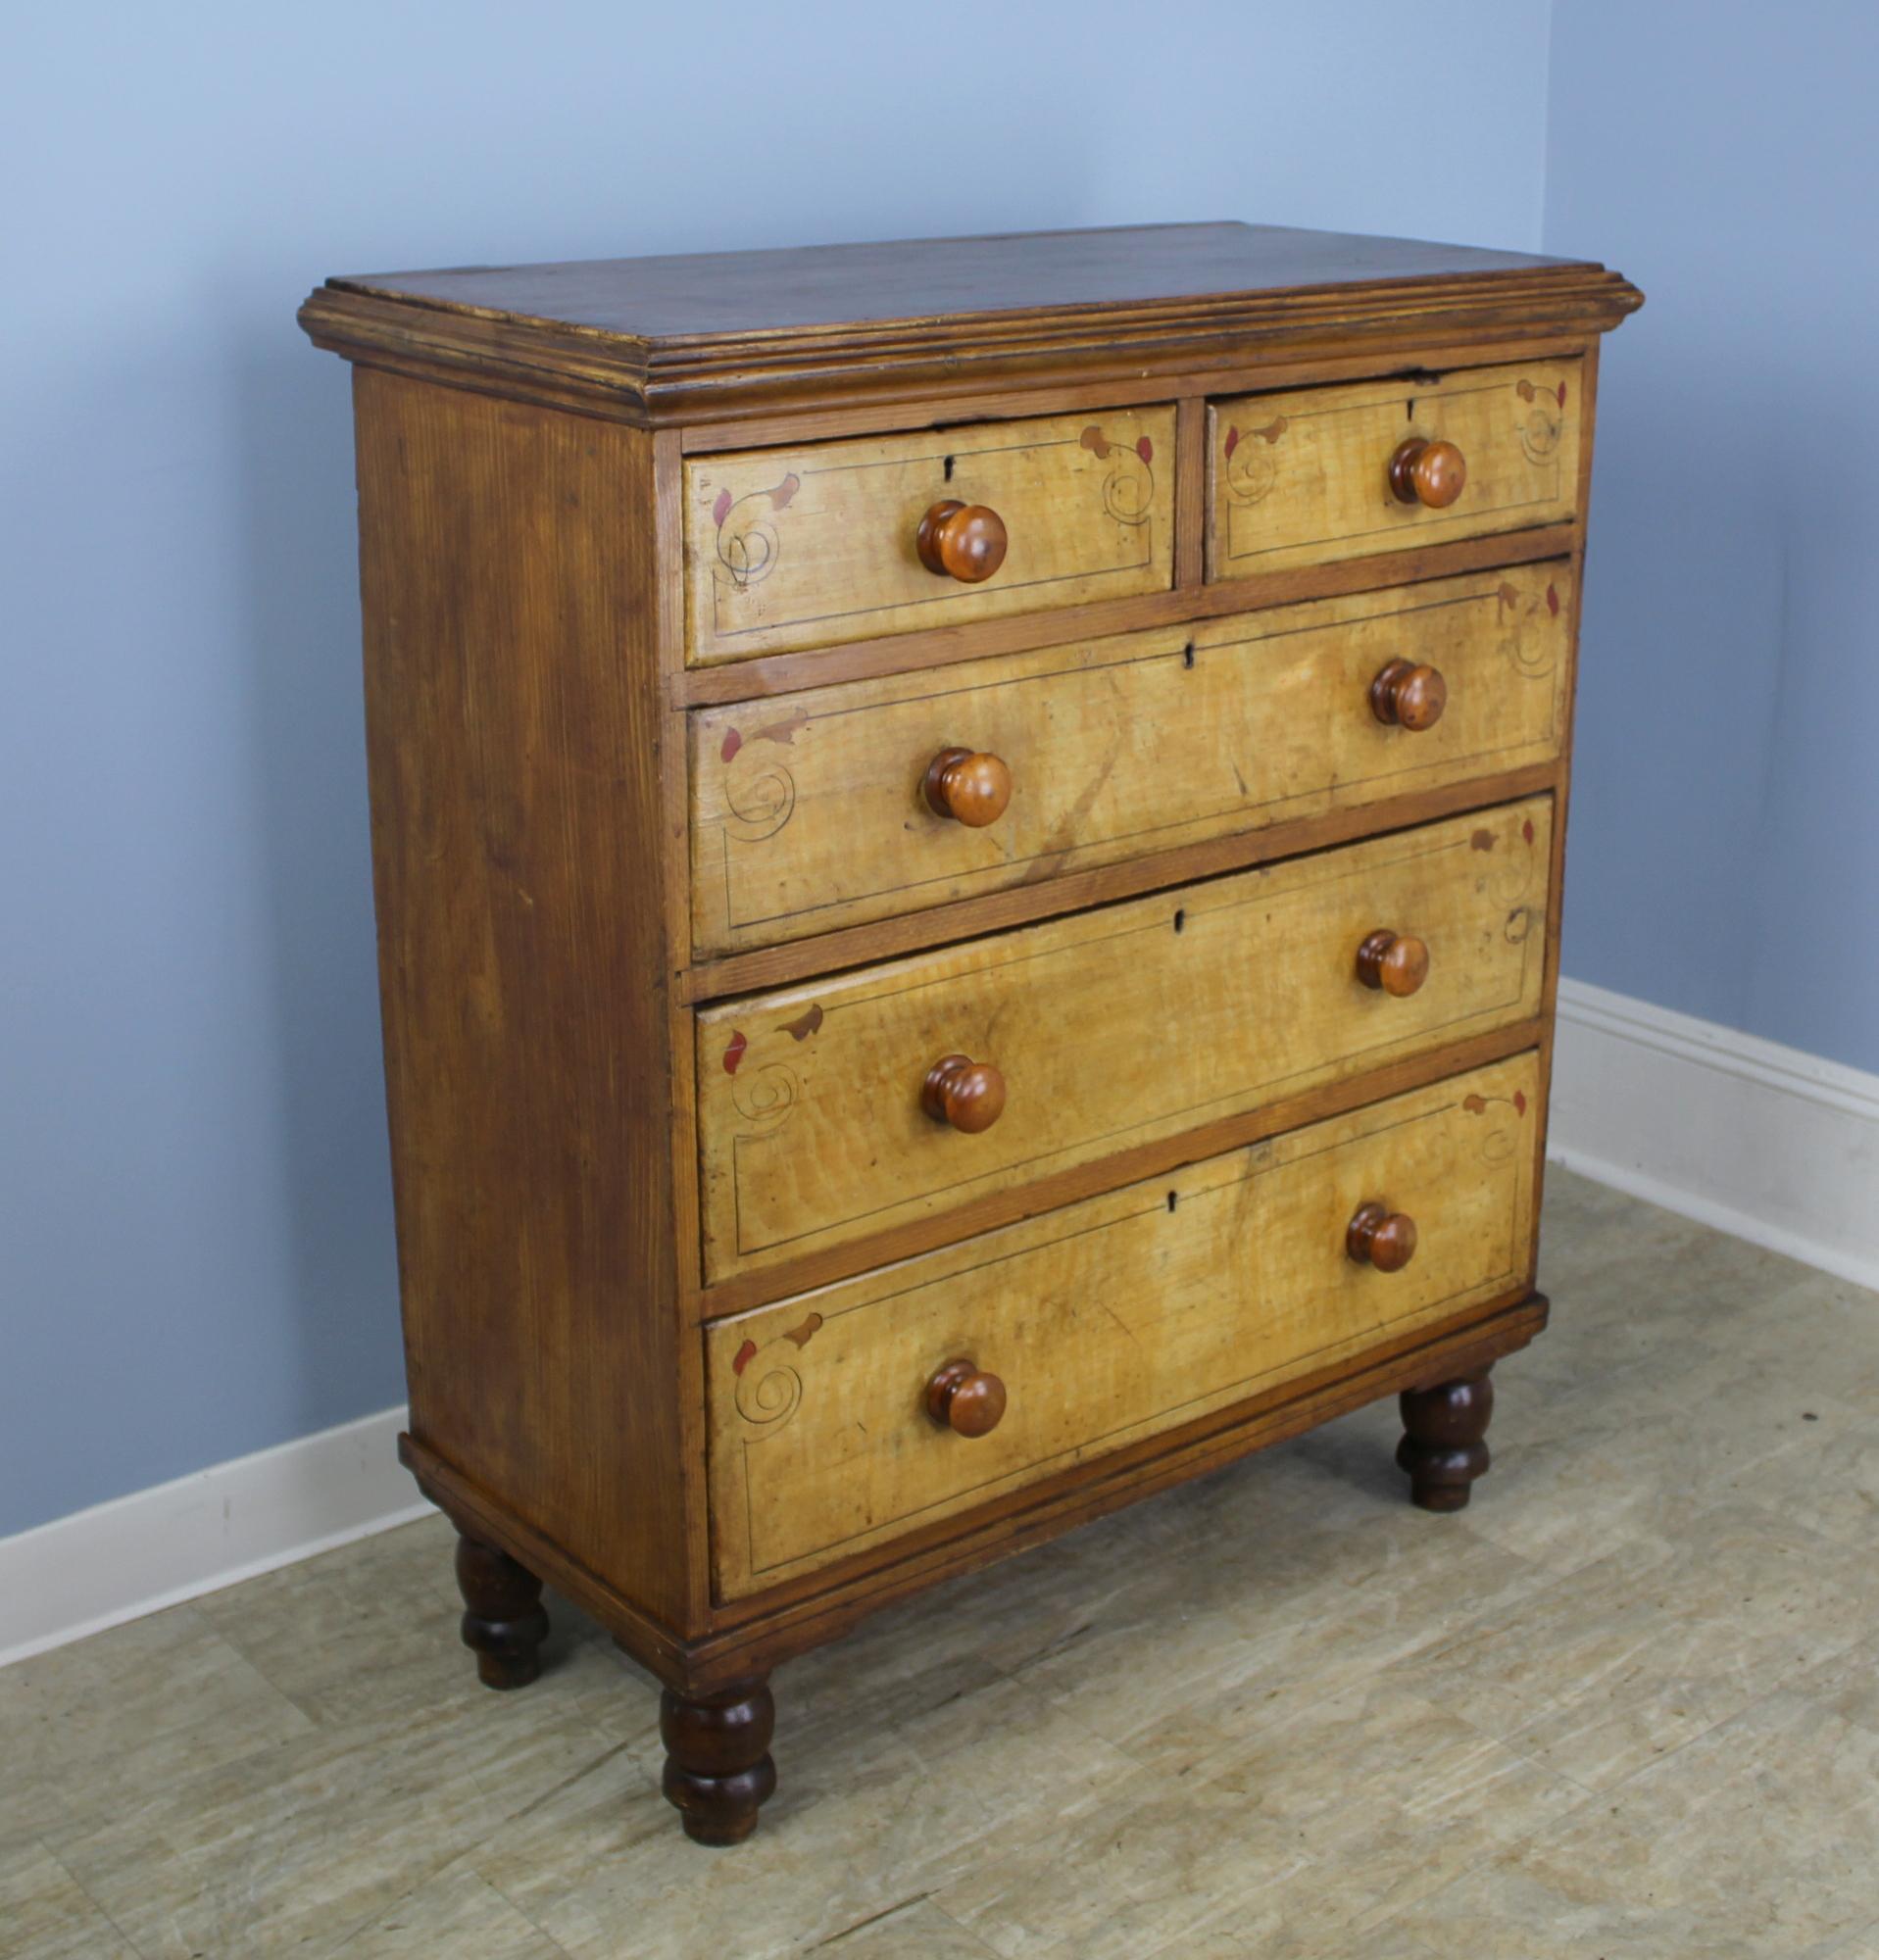 A whimsically hand painted honey colored pine chest of drawers. Charming molded top and bun feet. Drawers are clean and slide easily.